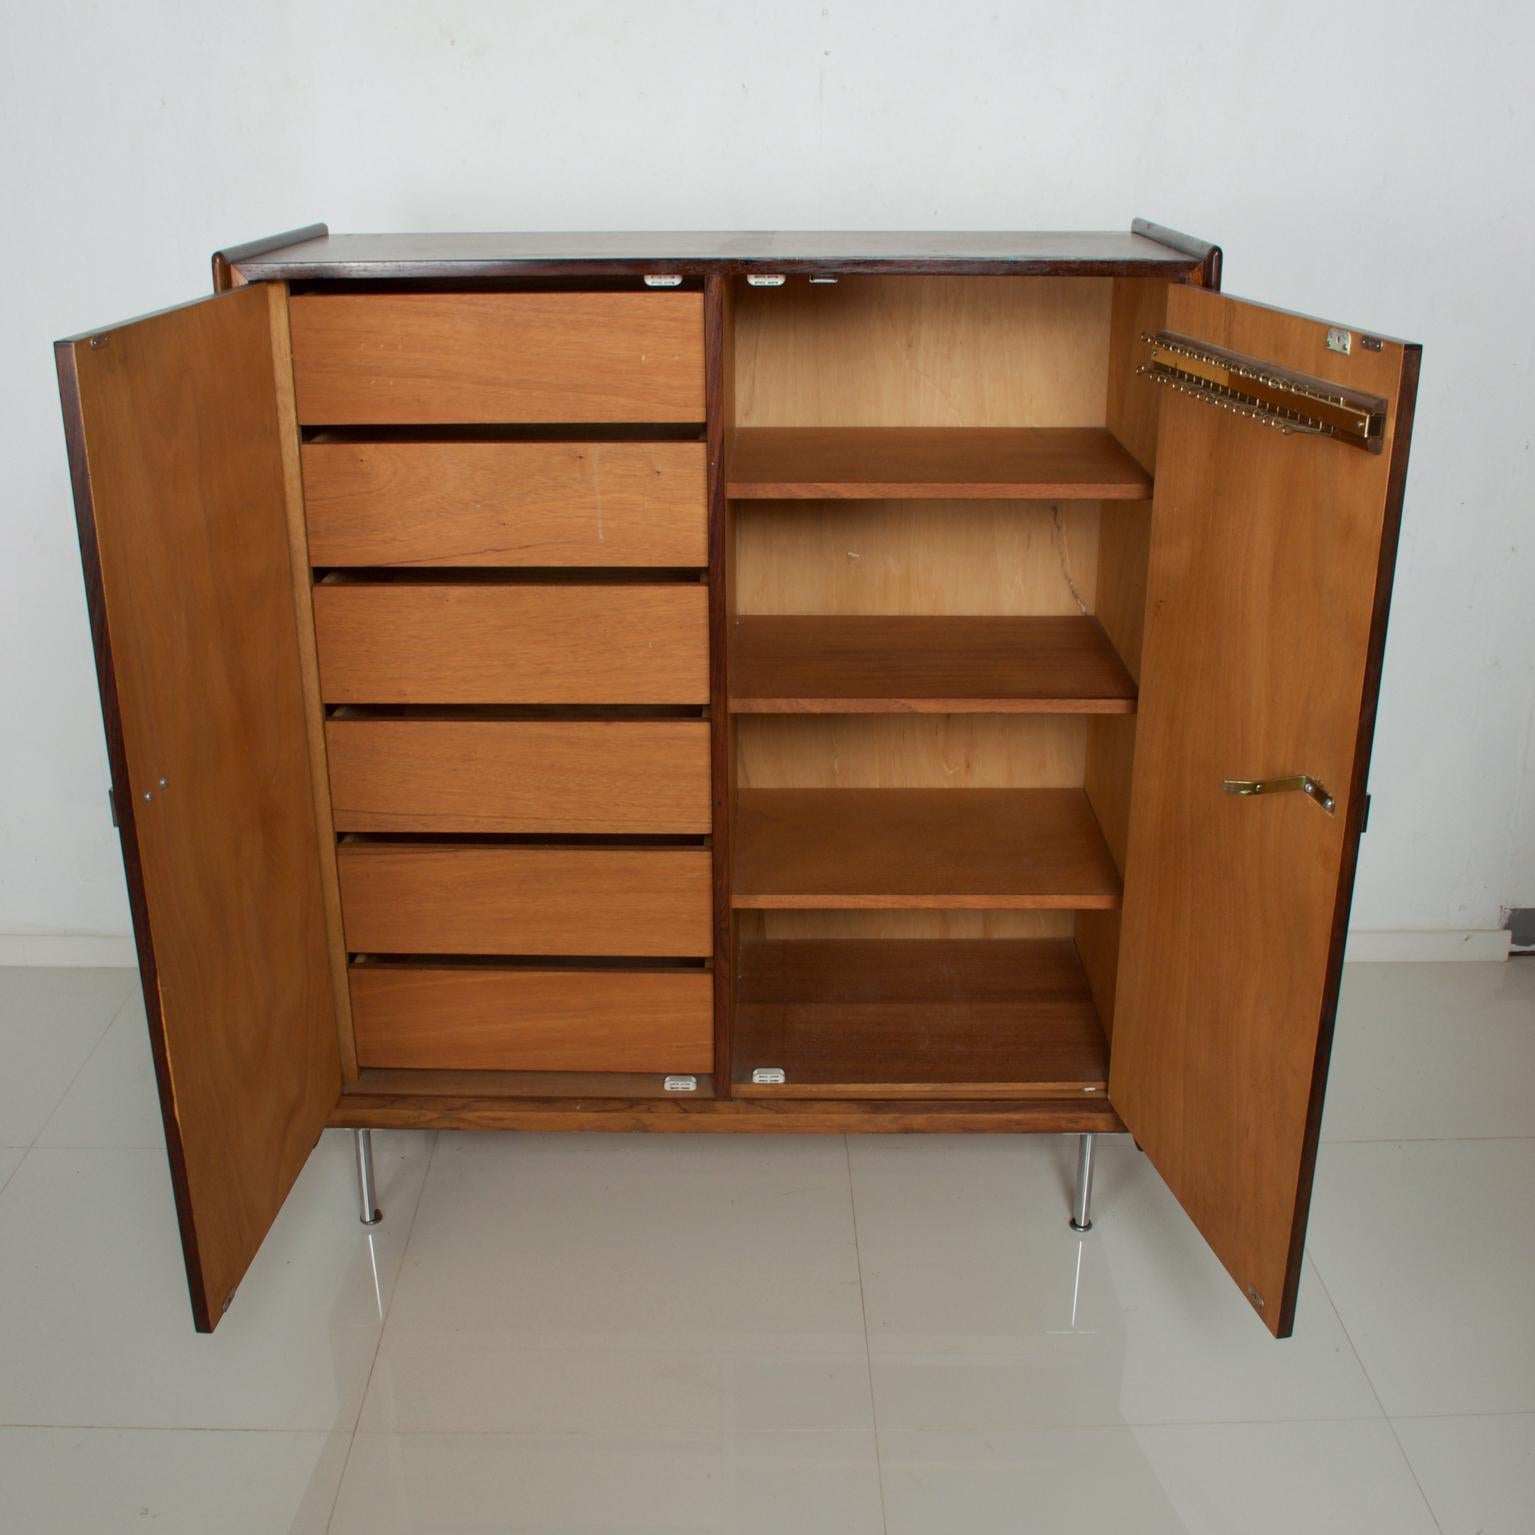 We are pleased to offer for your consideration a mid-century danish modern highboy in Rosewood with teak drawers. Mounted on chrome-plated legs. The doors open with ease. Sculptural chrome-plated handles. Made in Denmark circa late 1960s.